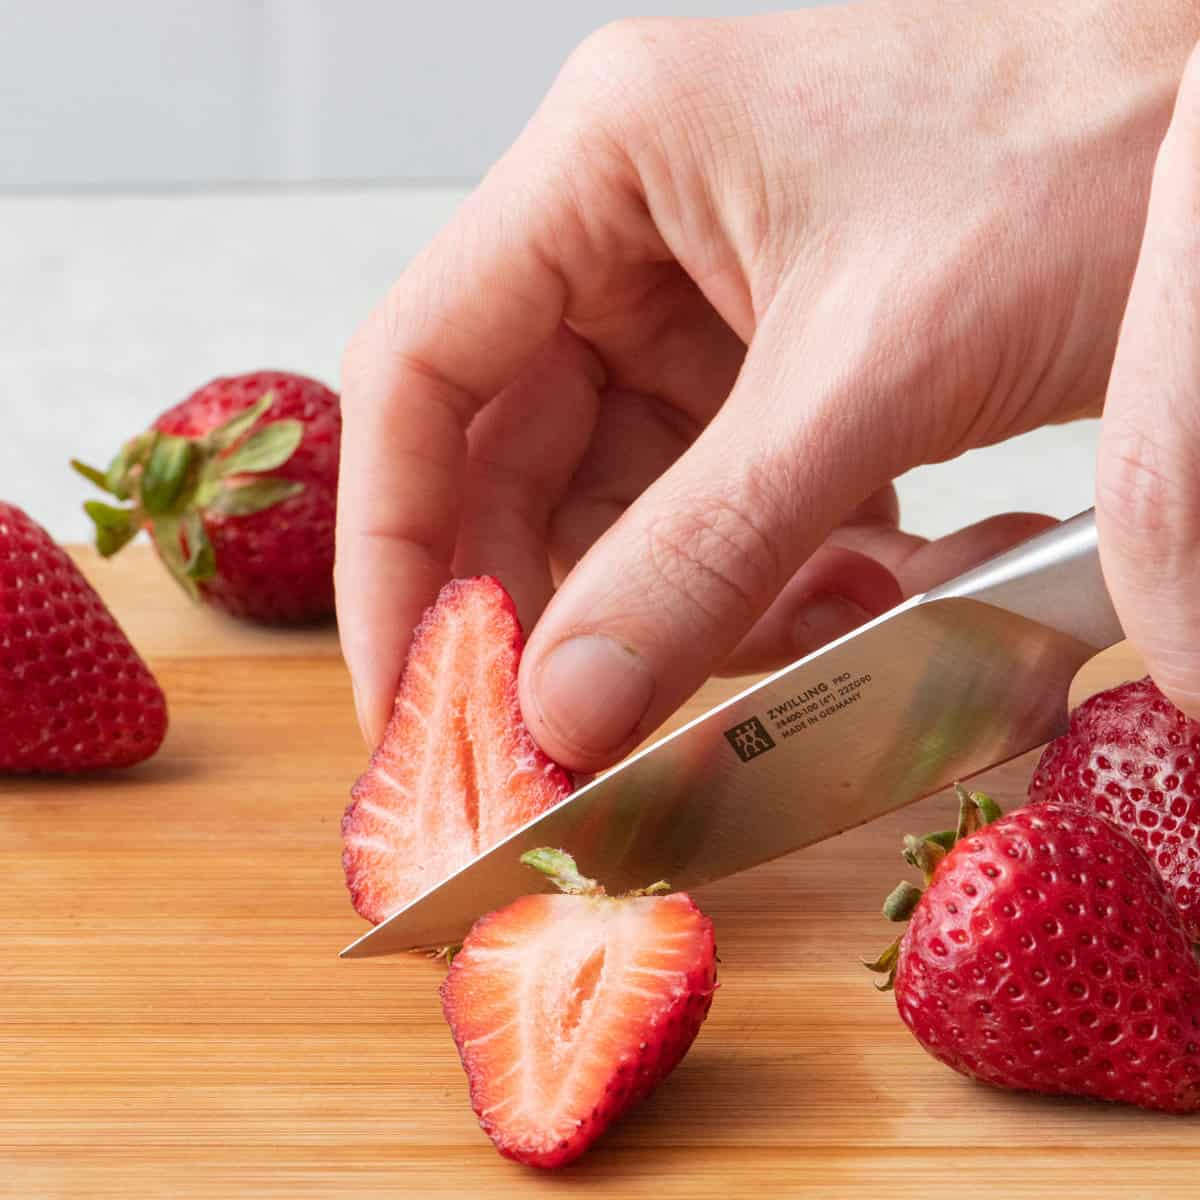 Hand slicing strawberry in half with a paring knife on wooden cutting board.